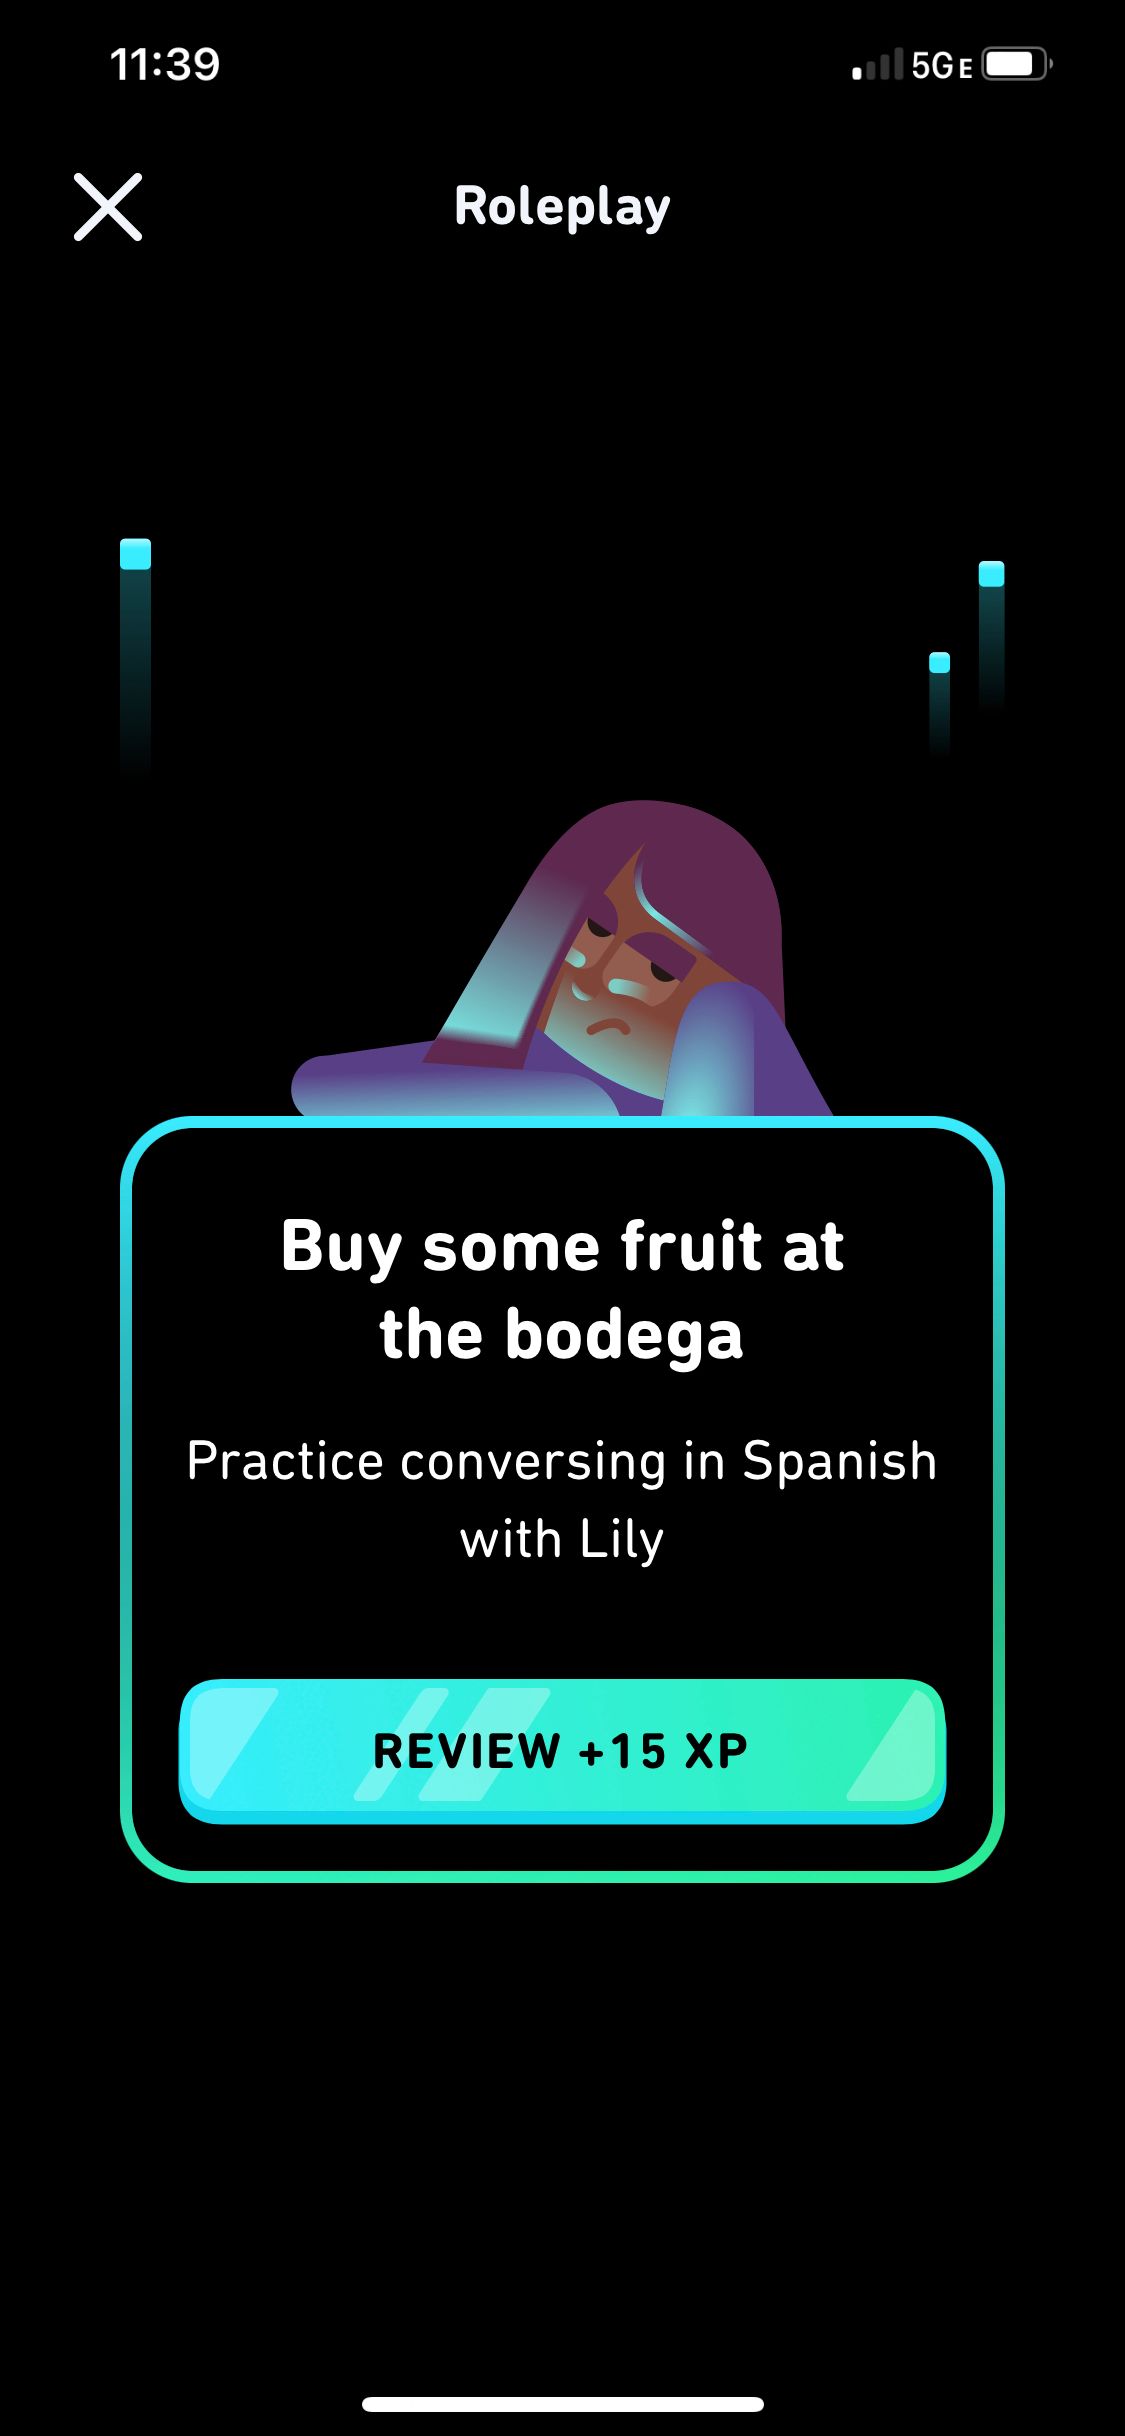 Screenshot of the Roleplay screen in Duolingo's premium subscription, Duolingo Max, with Lily leaning on top of a message that says "Buy some fruit at the bodega, Practice conversing in Spanish with Lily".